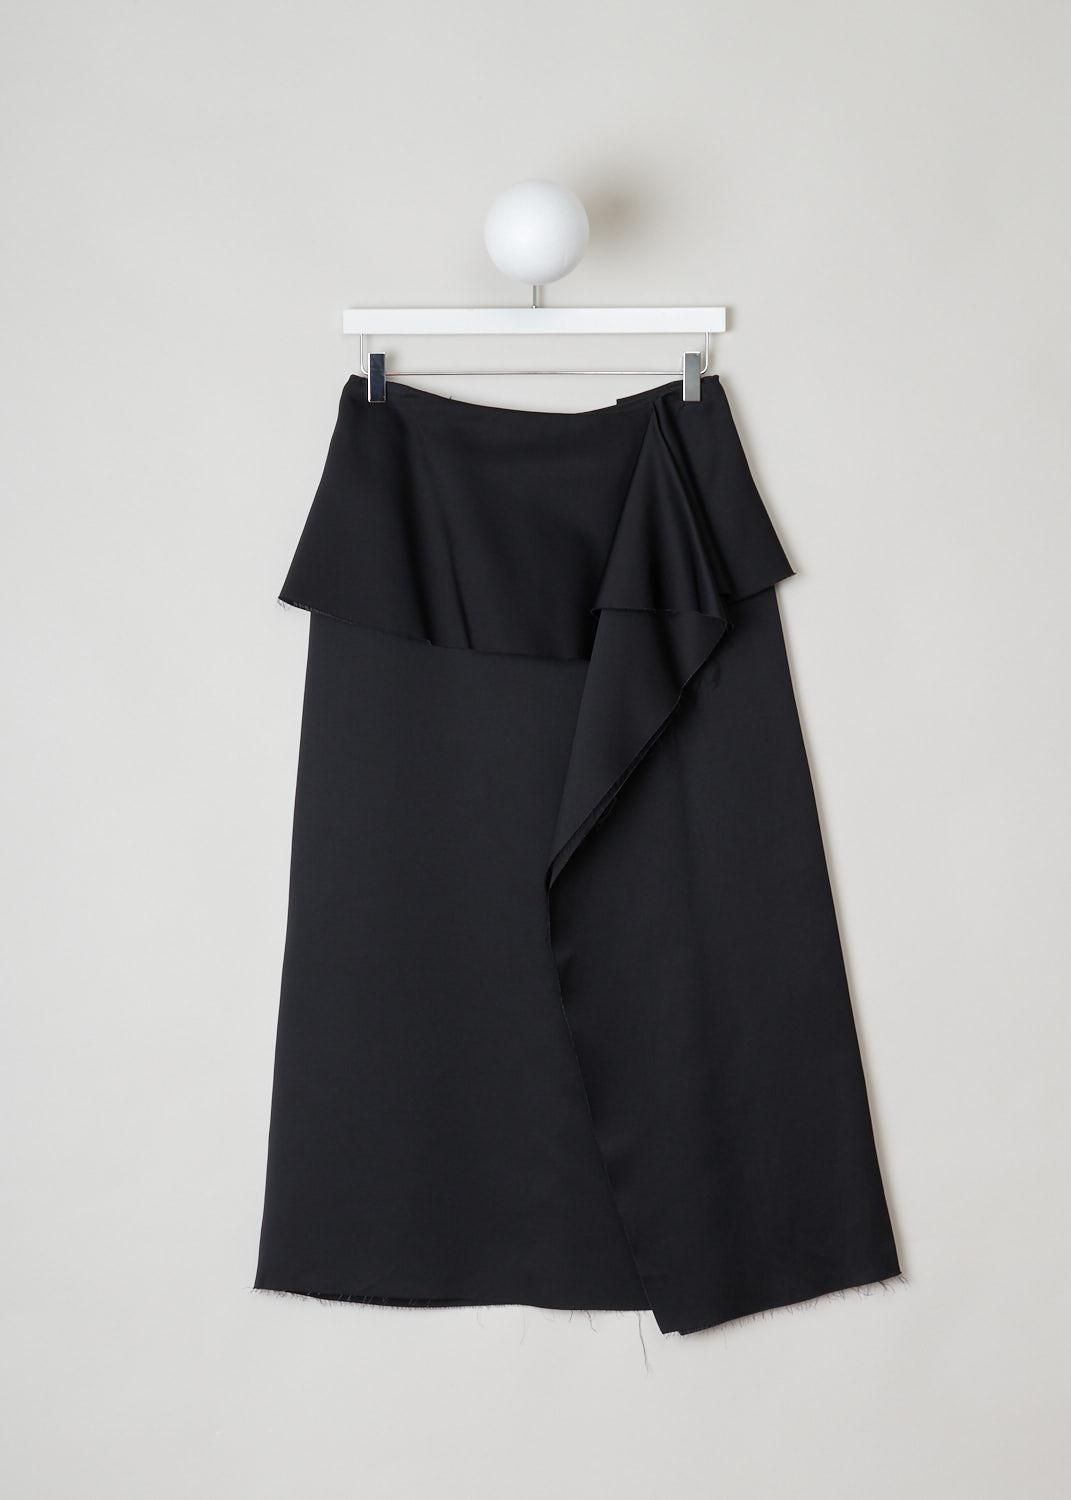 Marni, Black satin A-line skirt, GOMAT64JY0_TSD60_00N99_black, black, front, Black a-line skirt crafted from satin fabric. All the edges of the fabric are frilled and unfinished, featuring similarities with a wrap skirt. Furthermore a concealed zip fastening can be found on the back. 